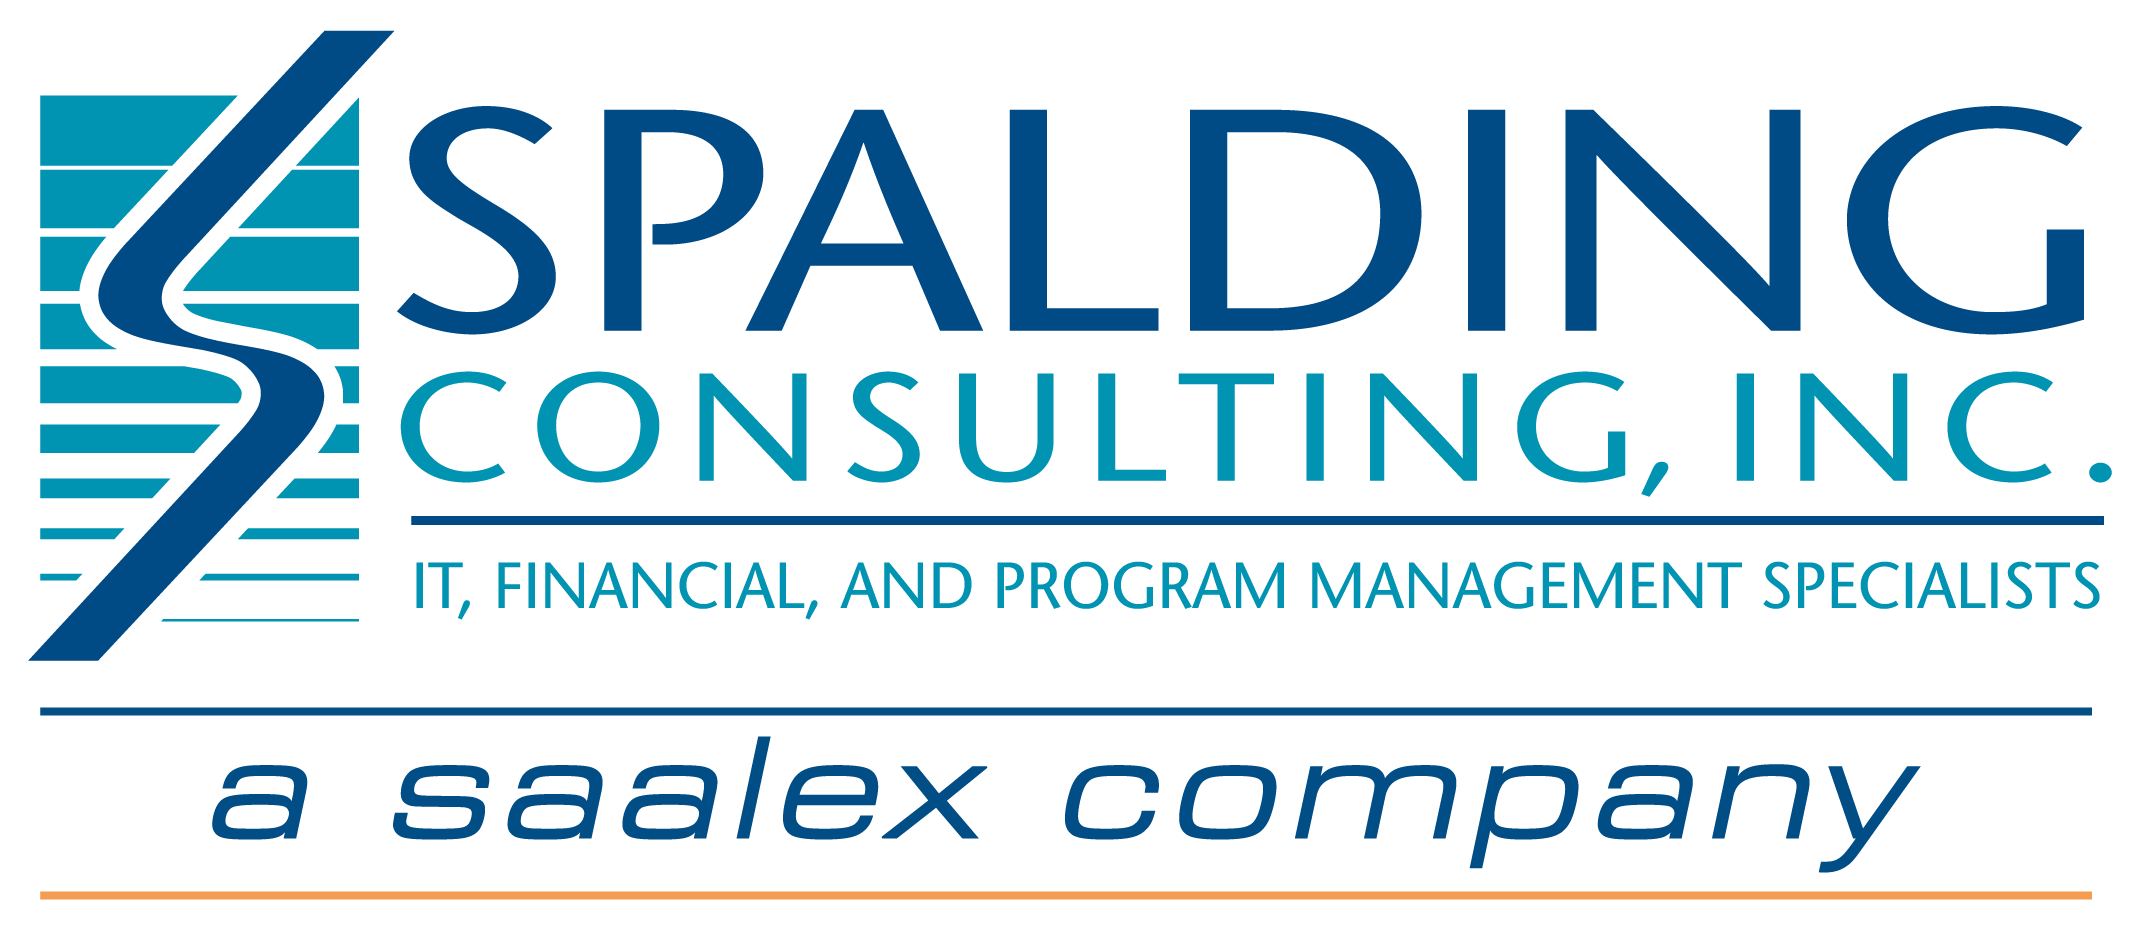 Spalding Consulting